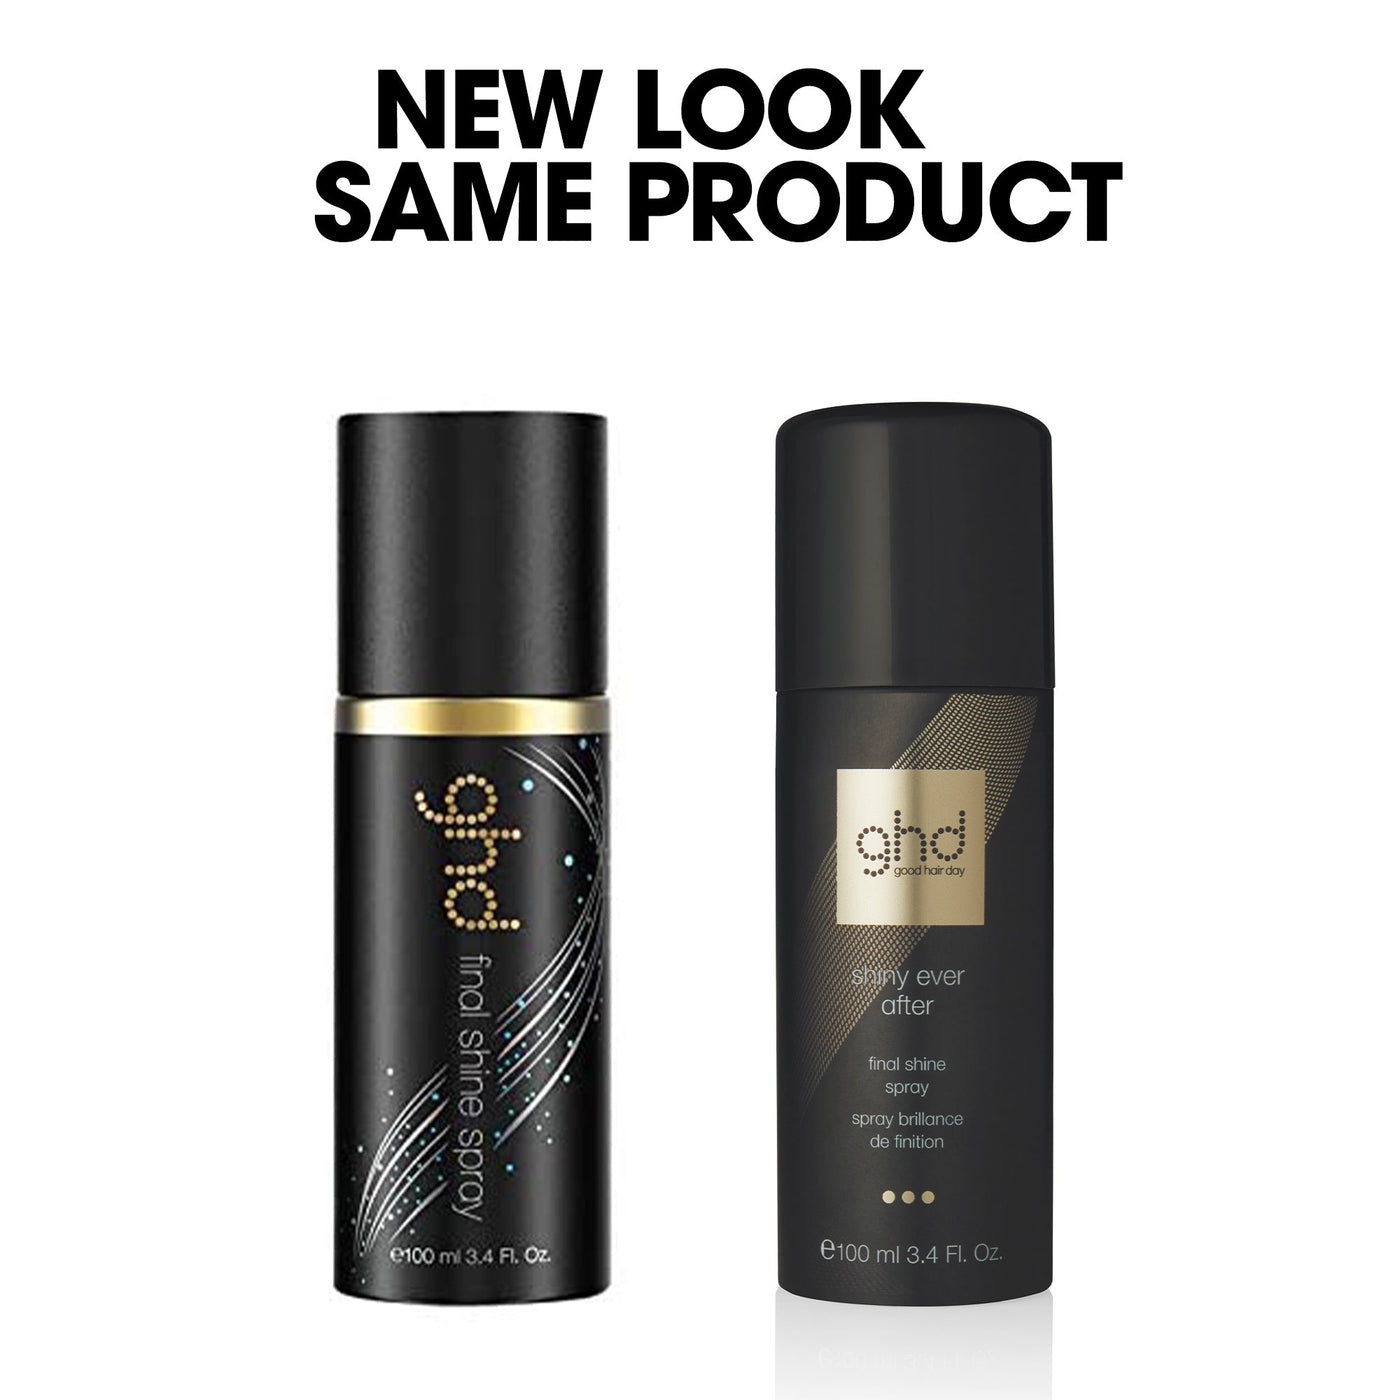 ghd Shiny Ever After Final Shine Spray (100ml) old & new look